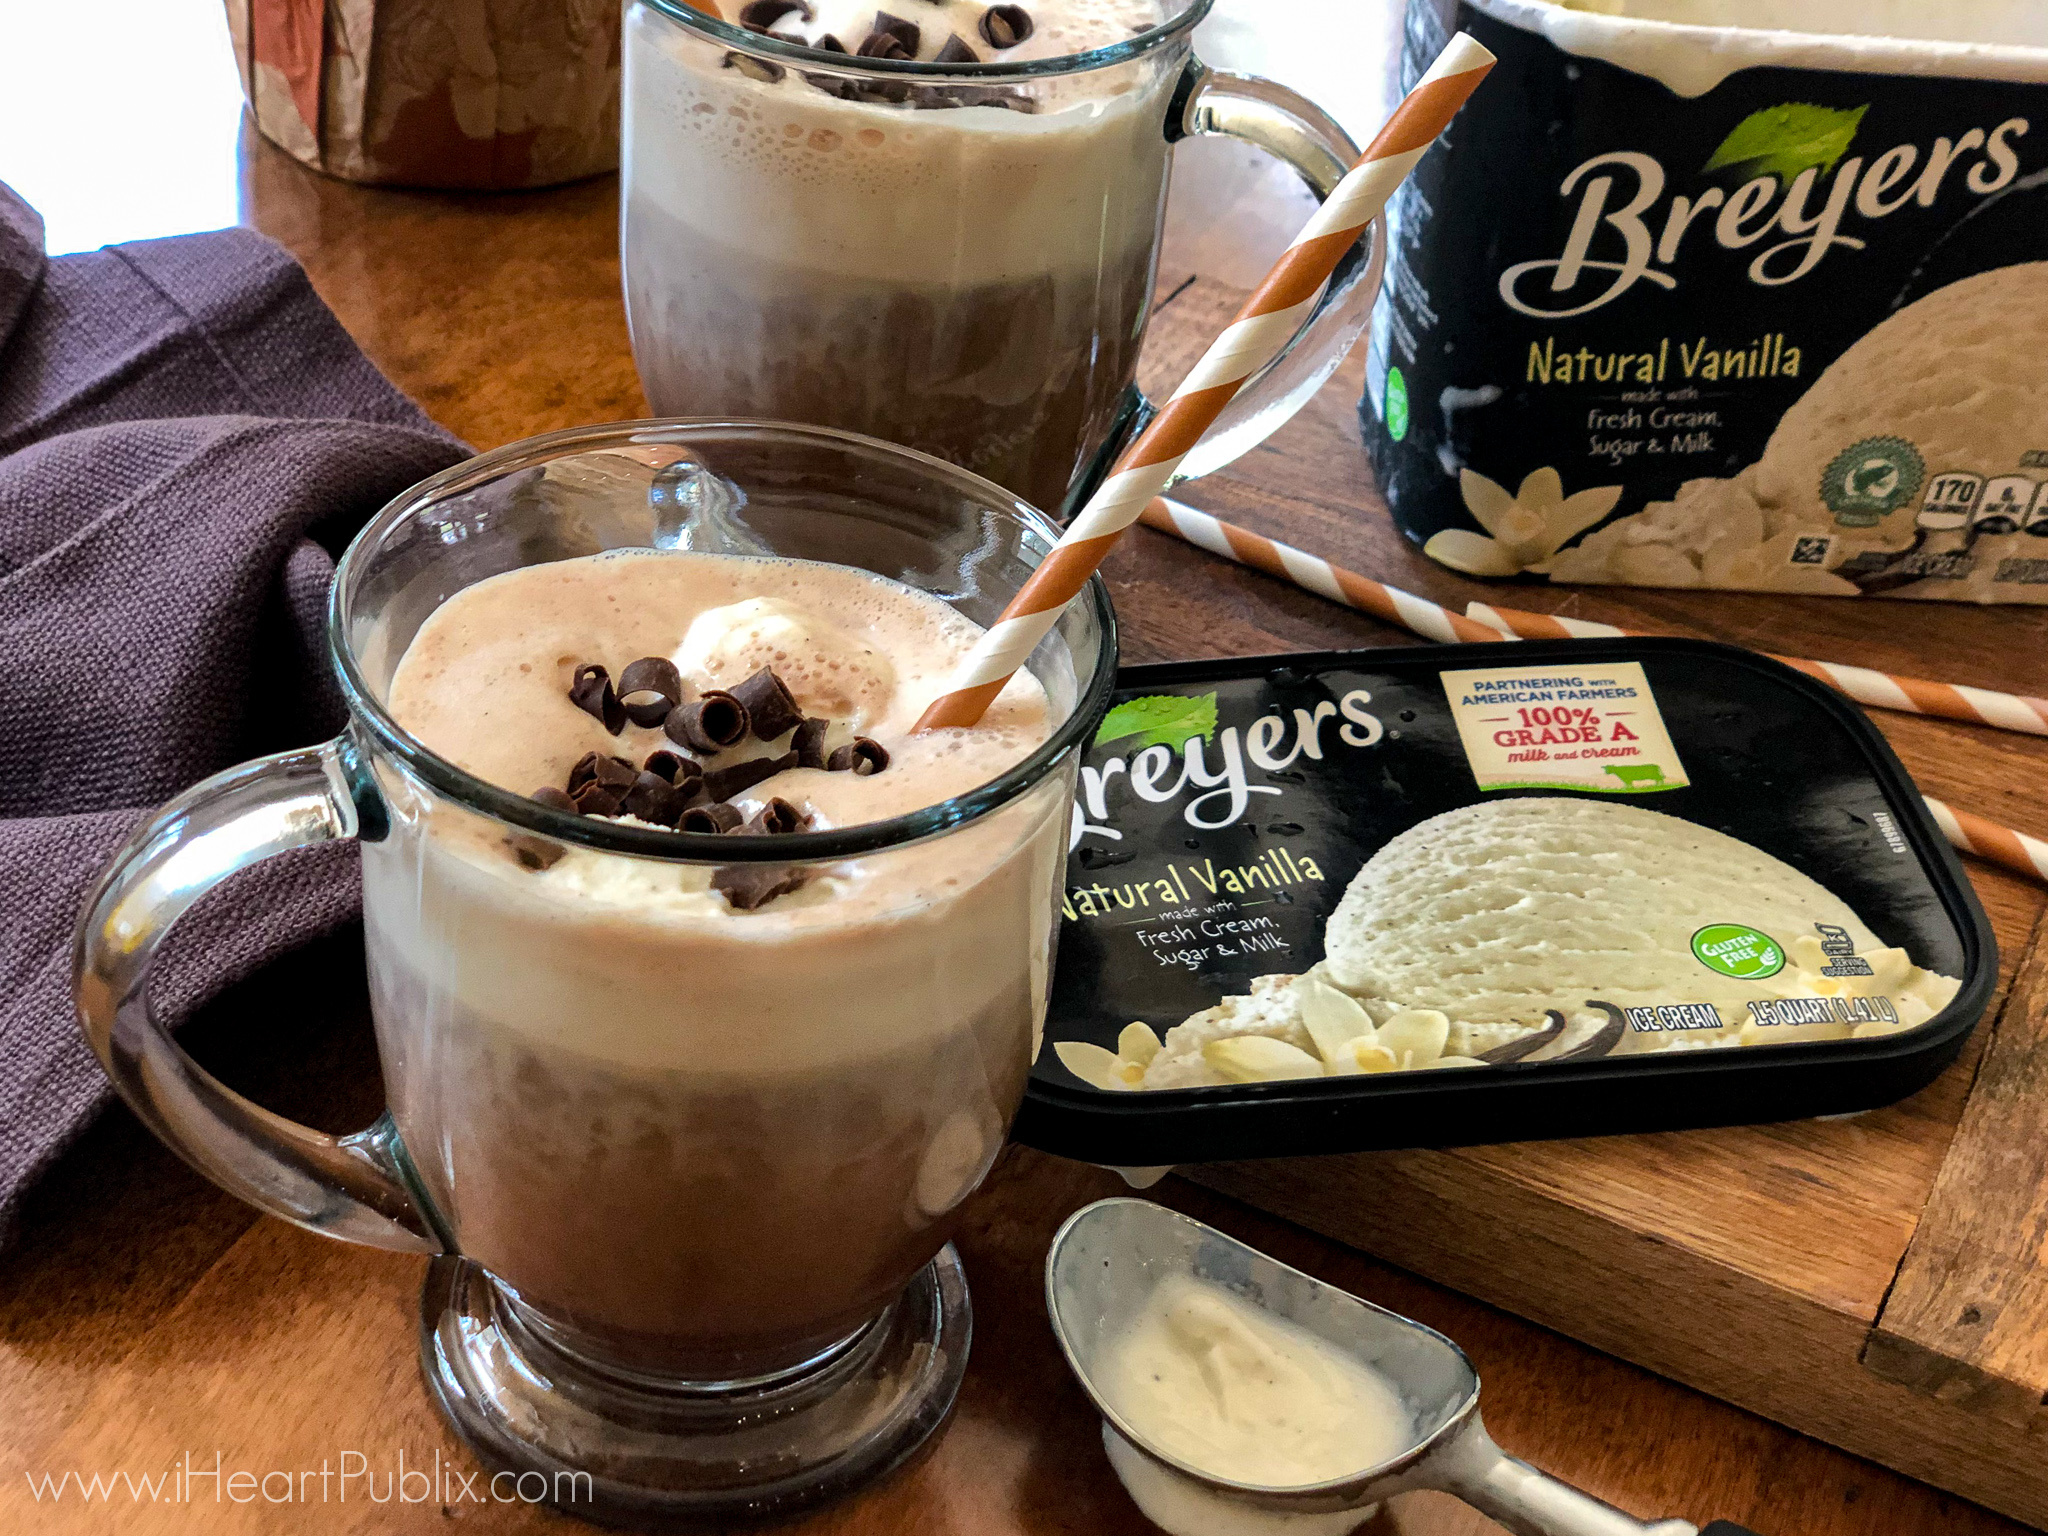 A Hot Chocolate Float Is The Dessert You Need Now! Make It While Breyers Is BOGO At Publix on I Heart Publix